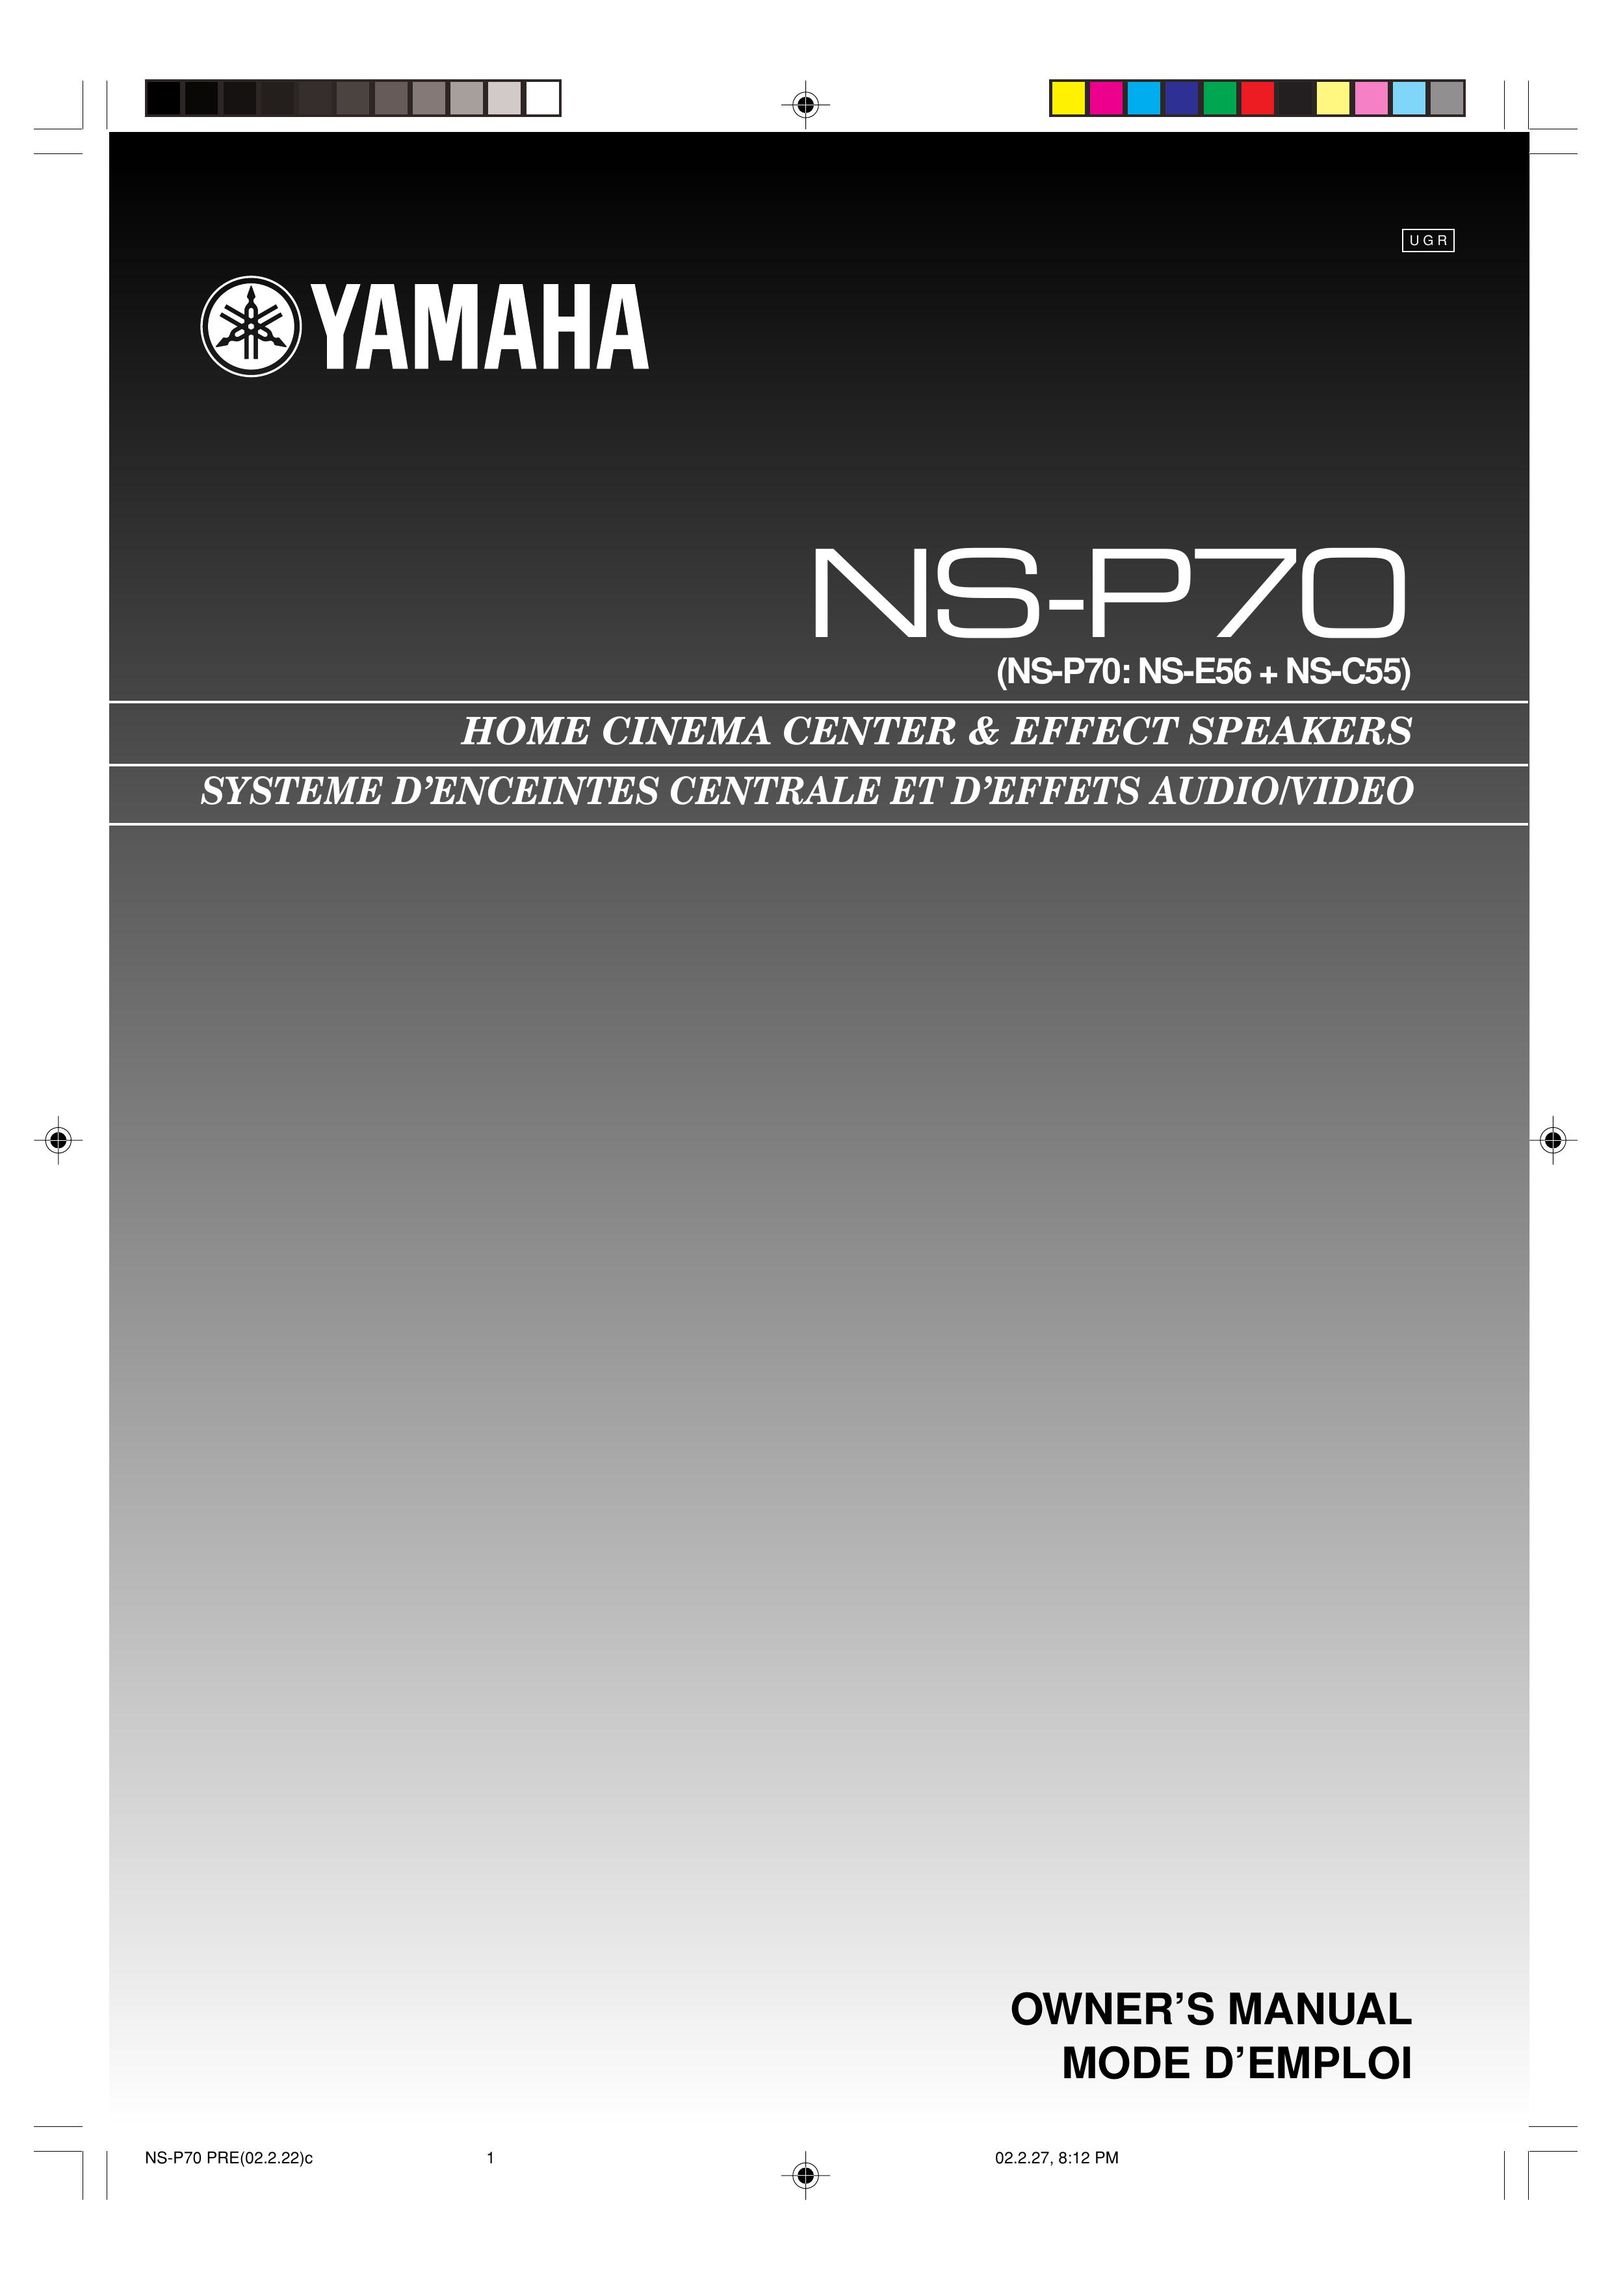 Yamaha NS-C55 Home Theater System User Manual